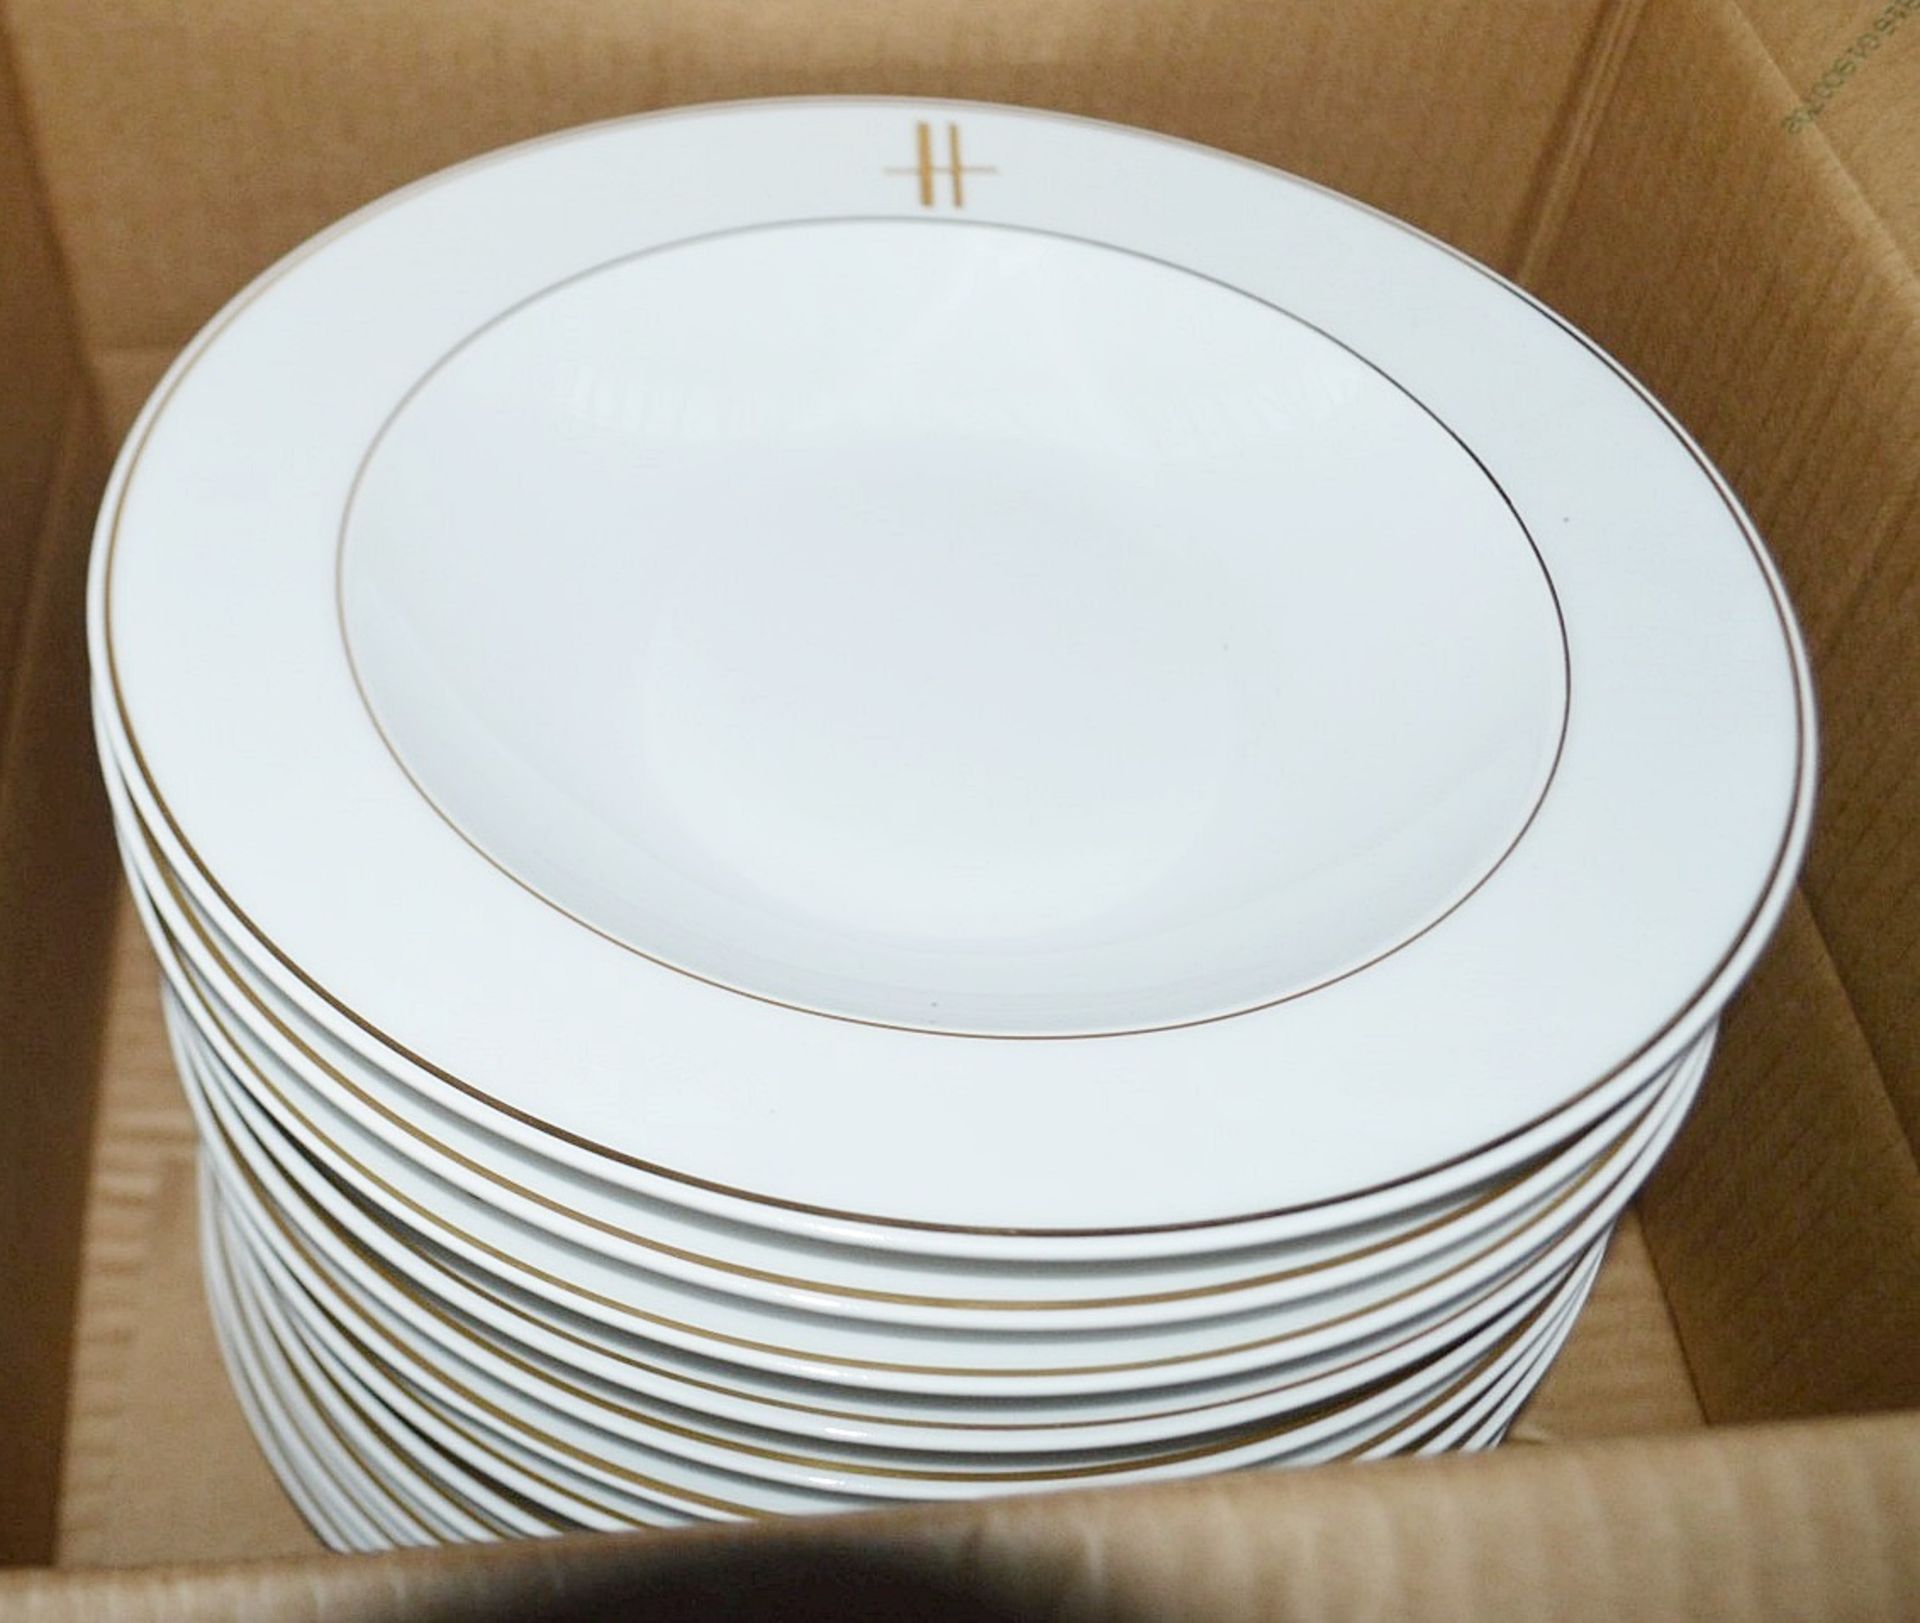 12 x PILLIVUYT 27cm Porcelain Pasta / Soup Plates In White Featuring 'Famous Branding' In Gold - - Image 2 of 5